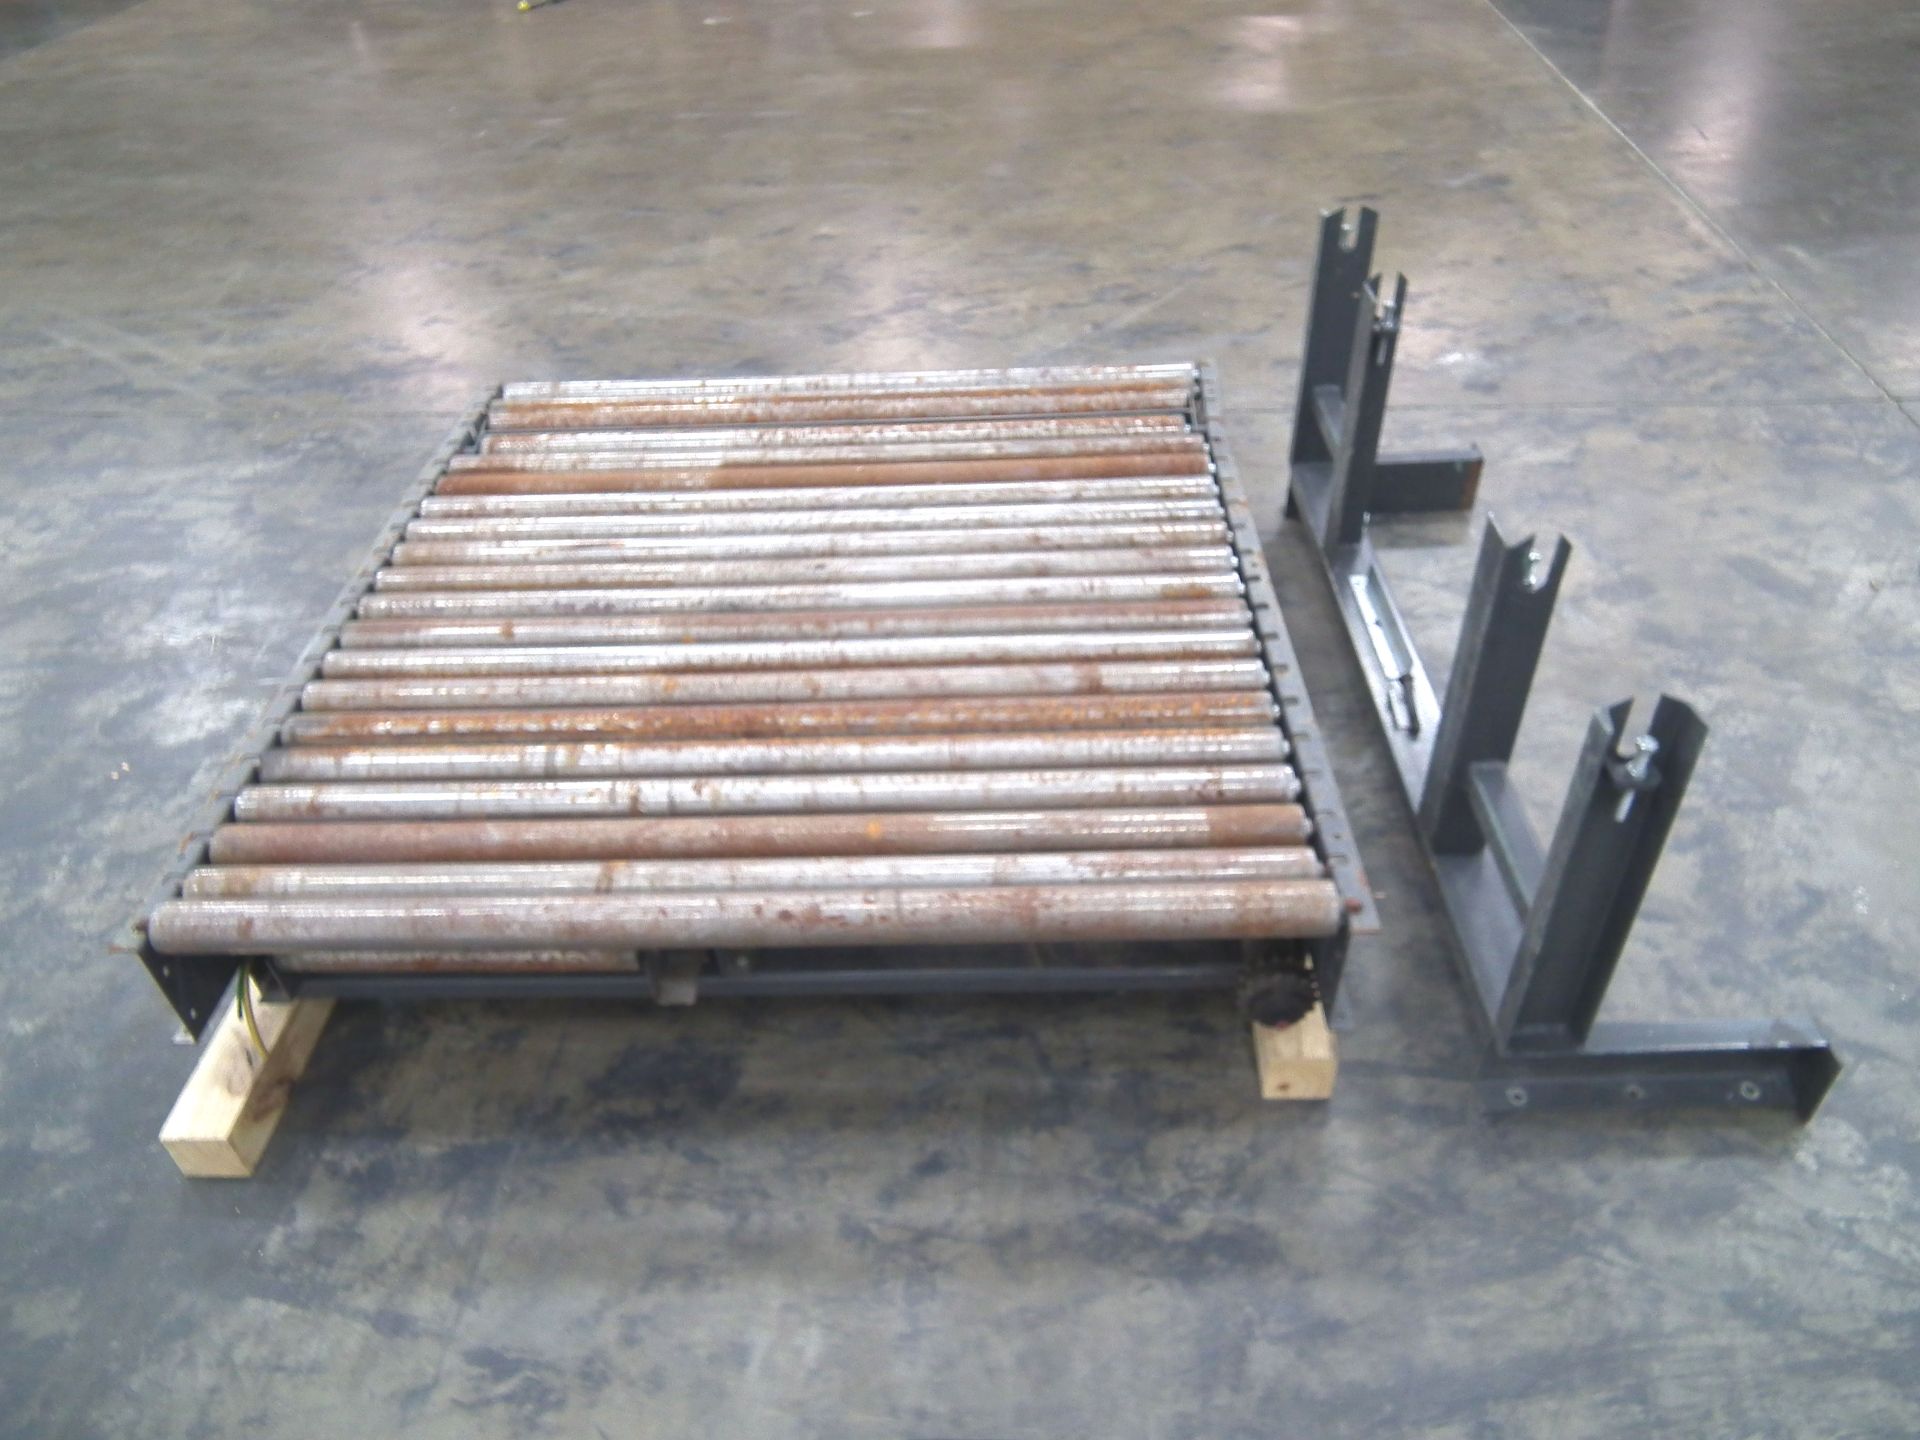 60" L x 60" W Gravity Rollers for Pallets A9926 - Image 4 of 5